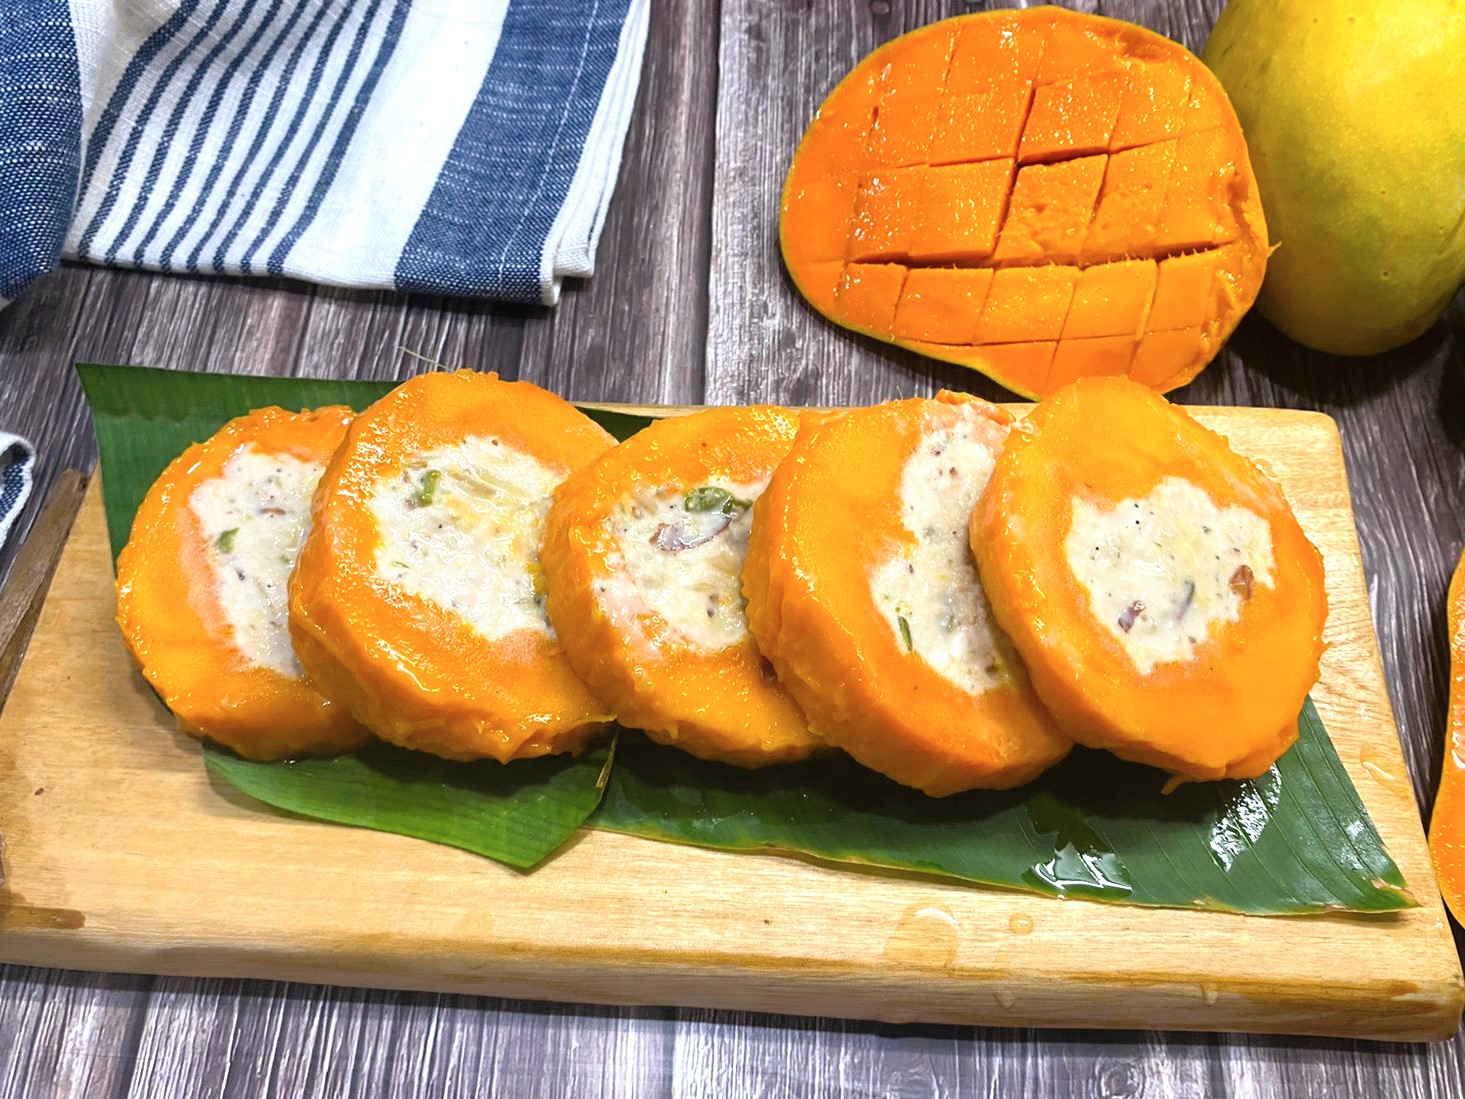 mango-stuffed-malai-kulfi-is-a-favorite-of-not-only-children-but-also-adults-in-the-scorching-heat